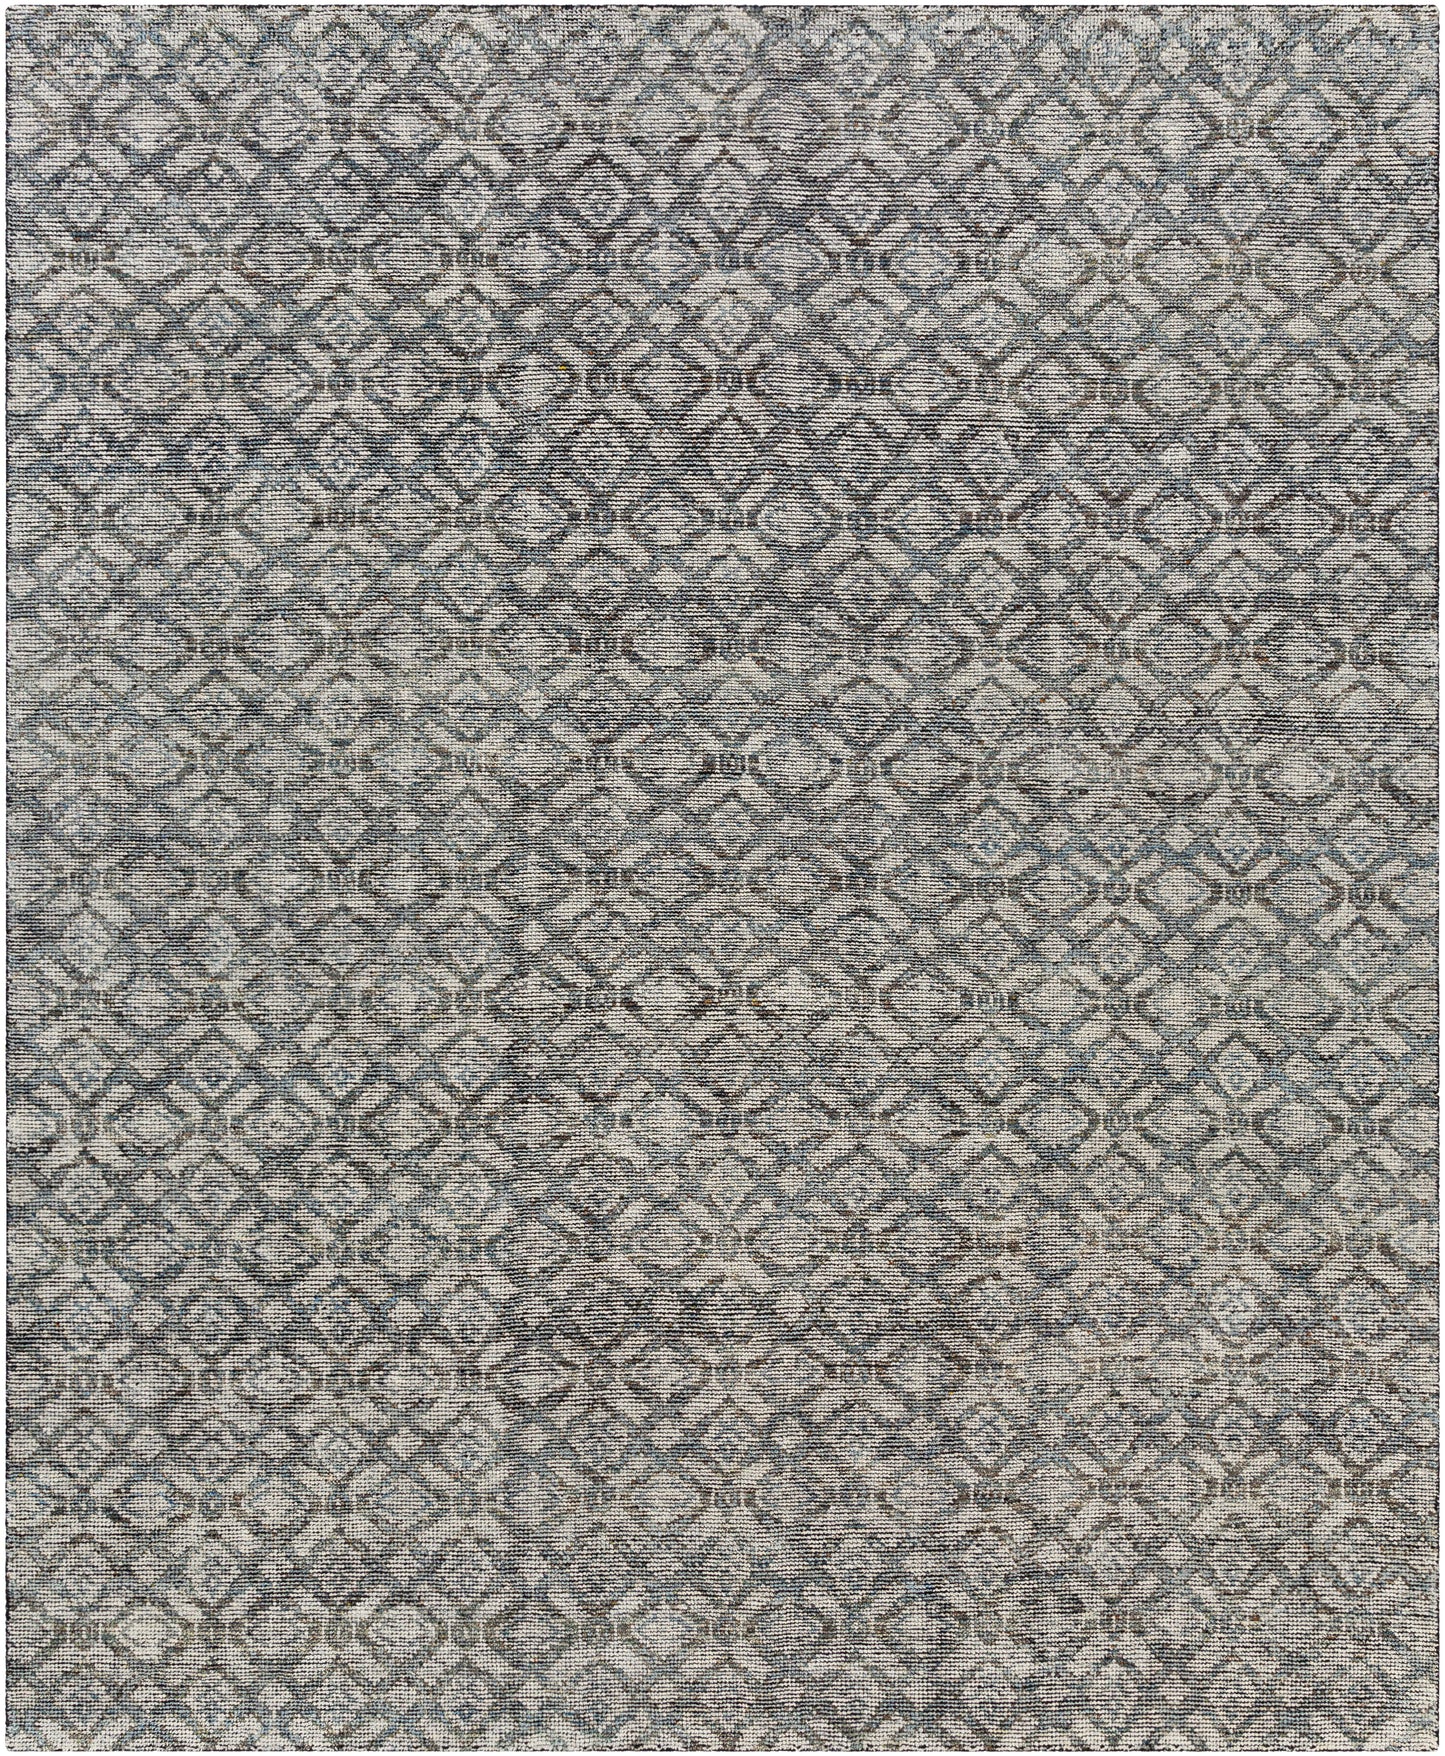 Malaga 26056 Hand Knotted Wool Indoor Area Rug by Surya Rugs